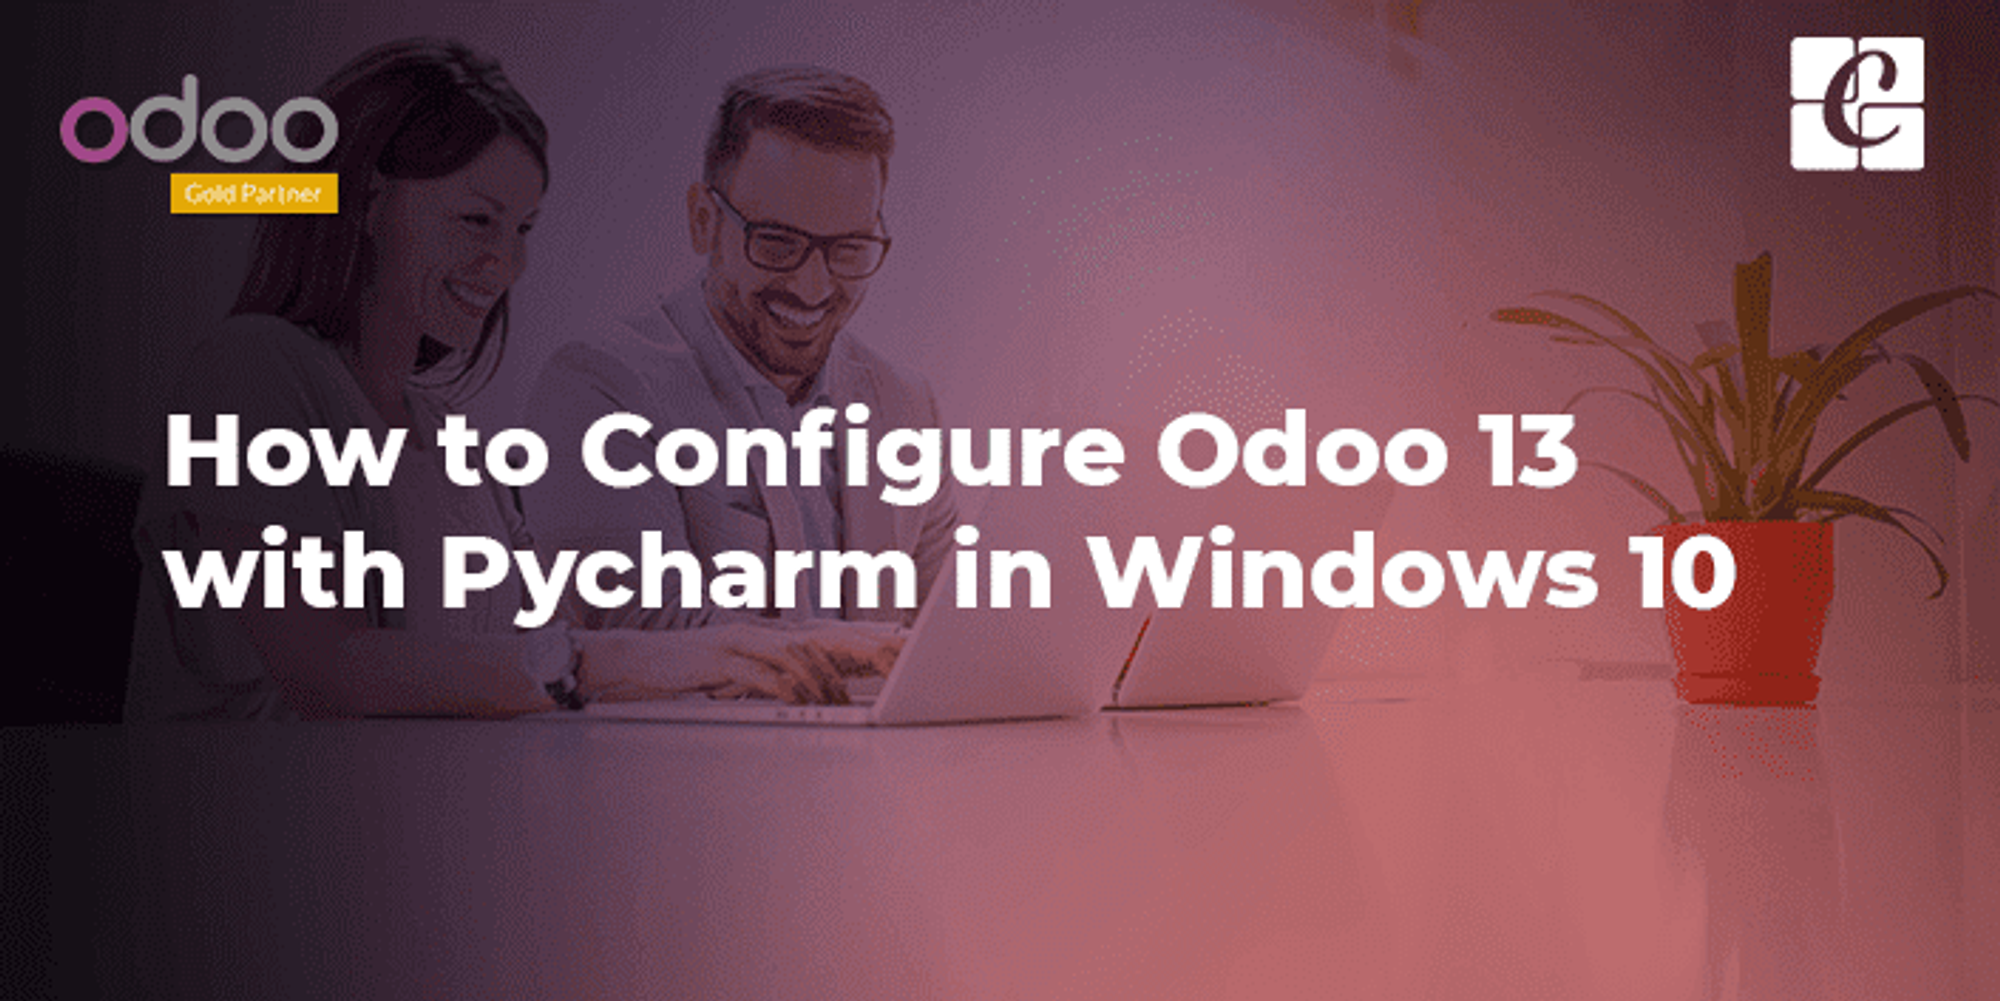 How to Configure Odoo 13 with Pycharm in Windows 10